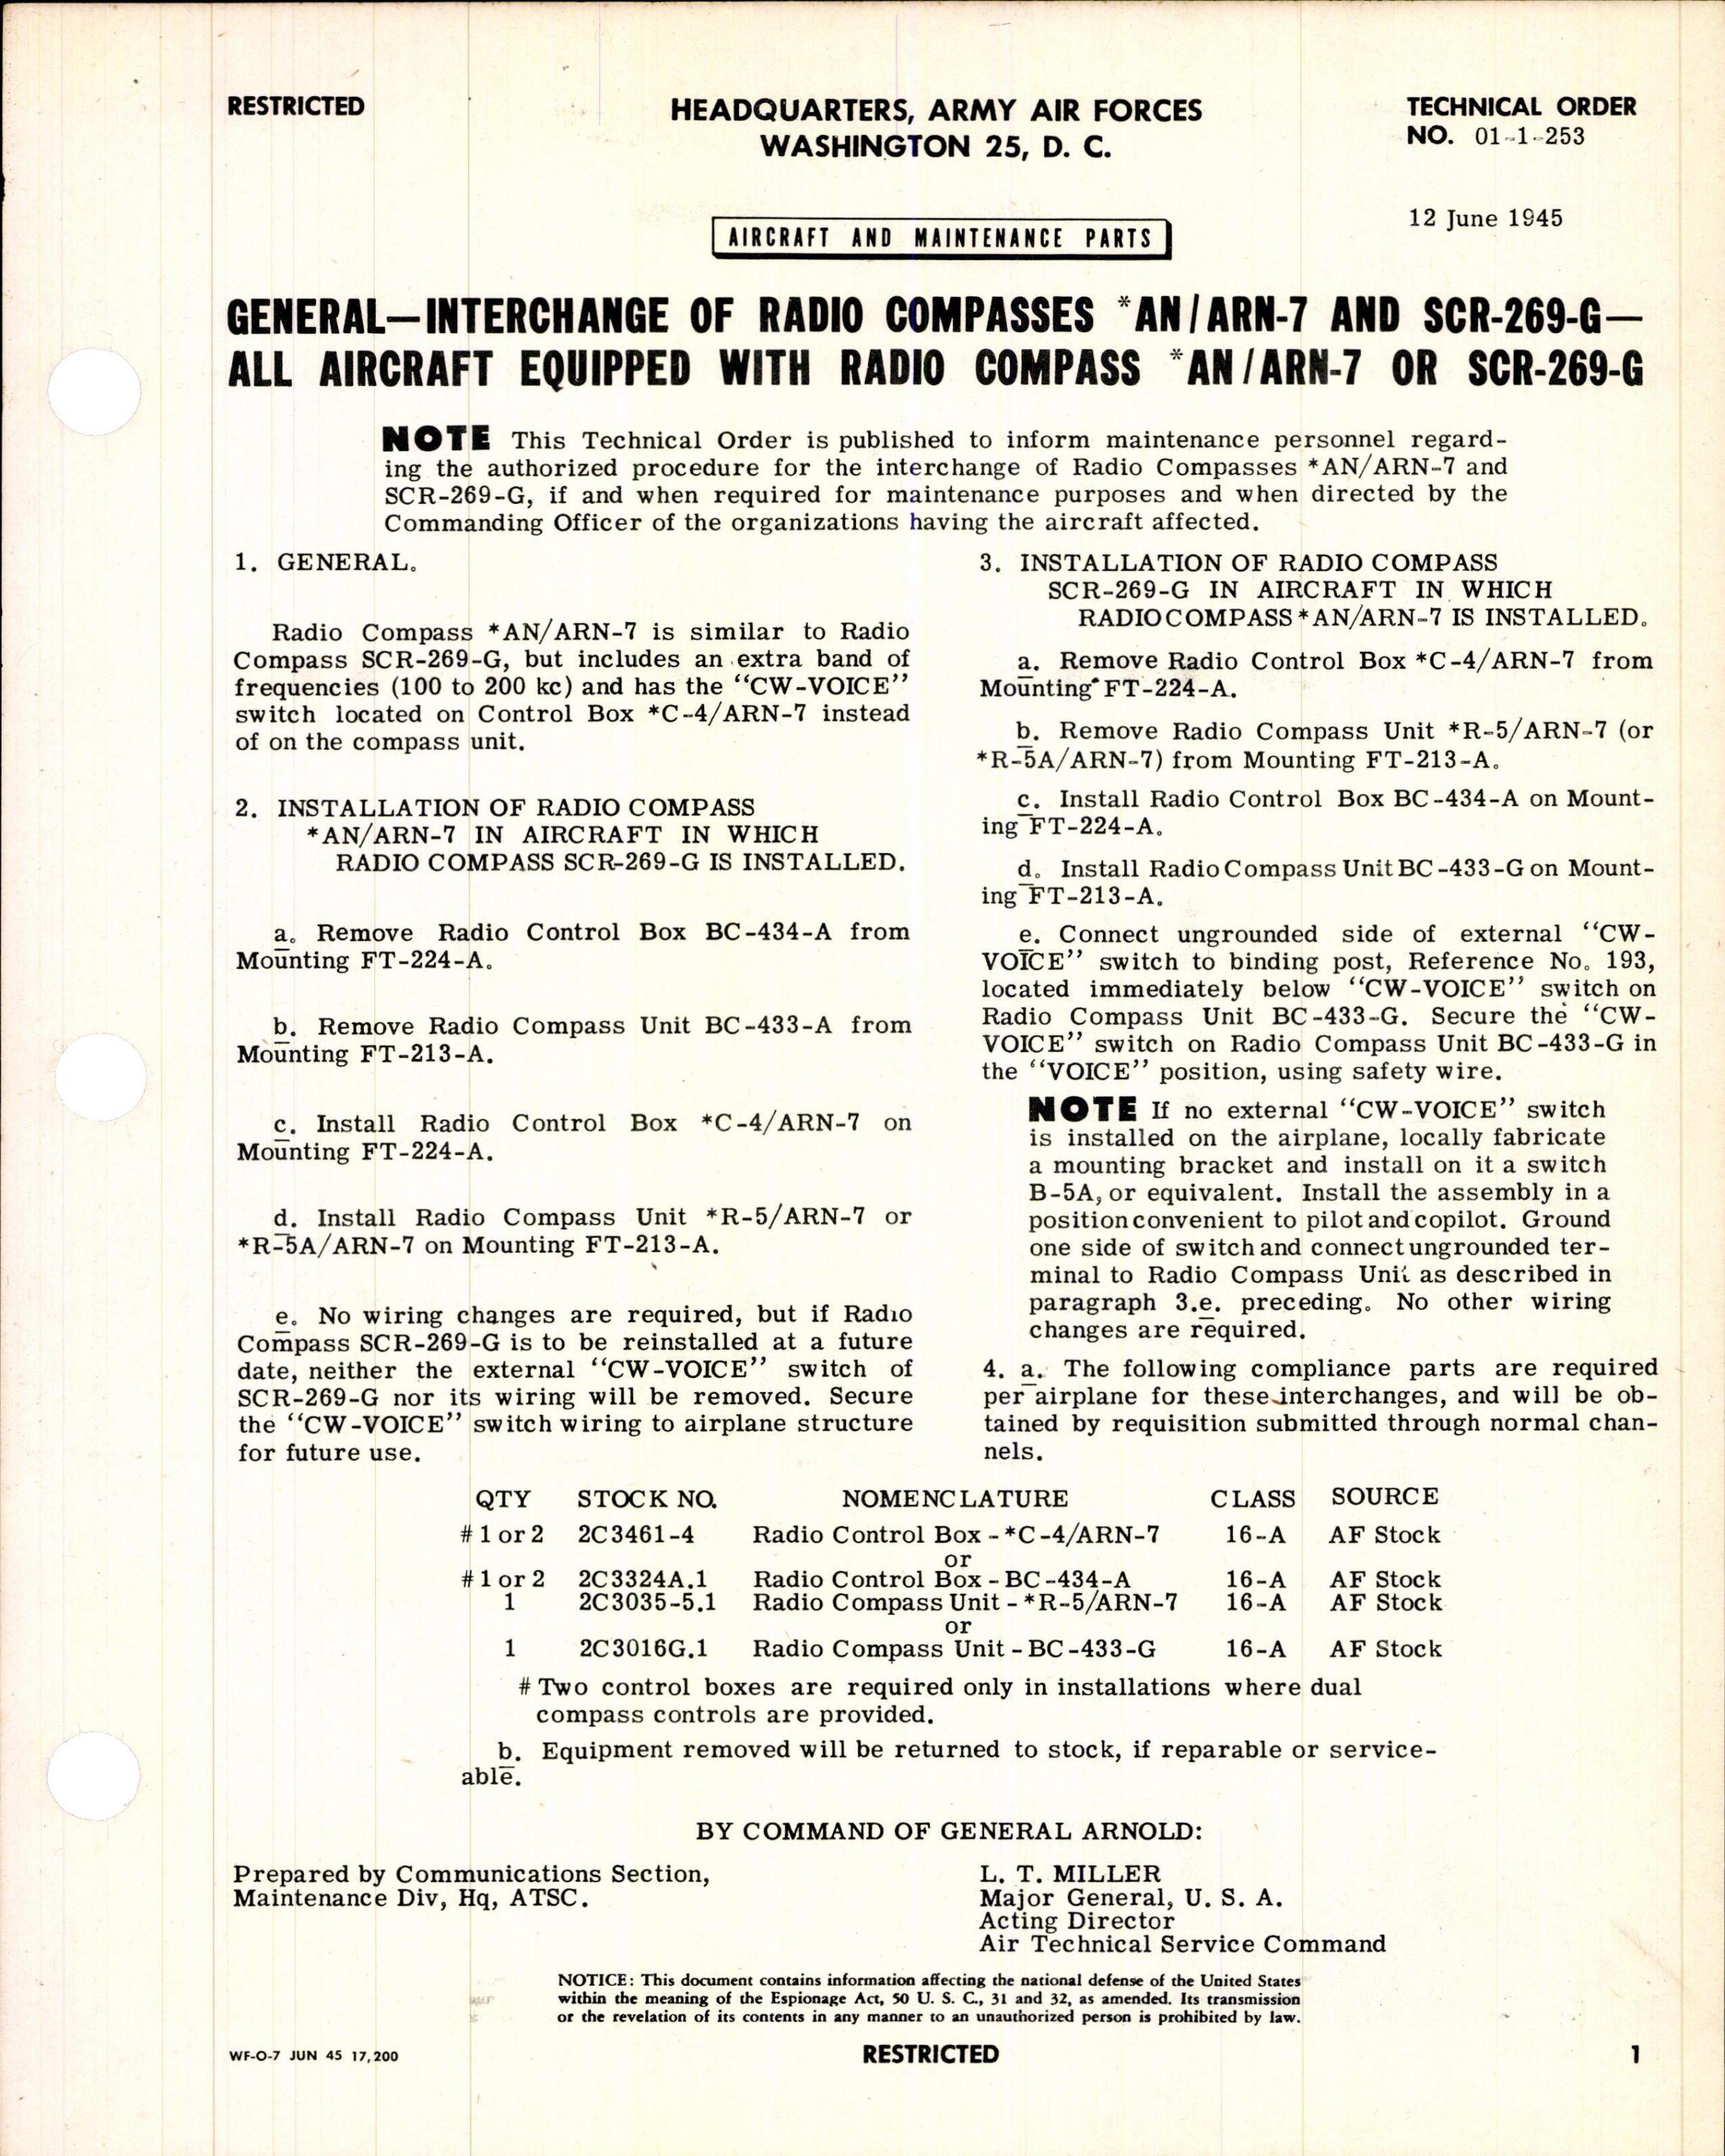 Sample page 1 from AirCorps Library document: Interchange of Radio Compasses AN/ARN-7 and SCR-269-G